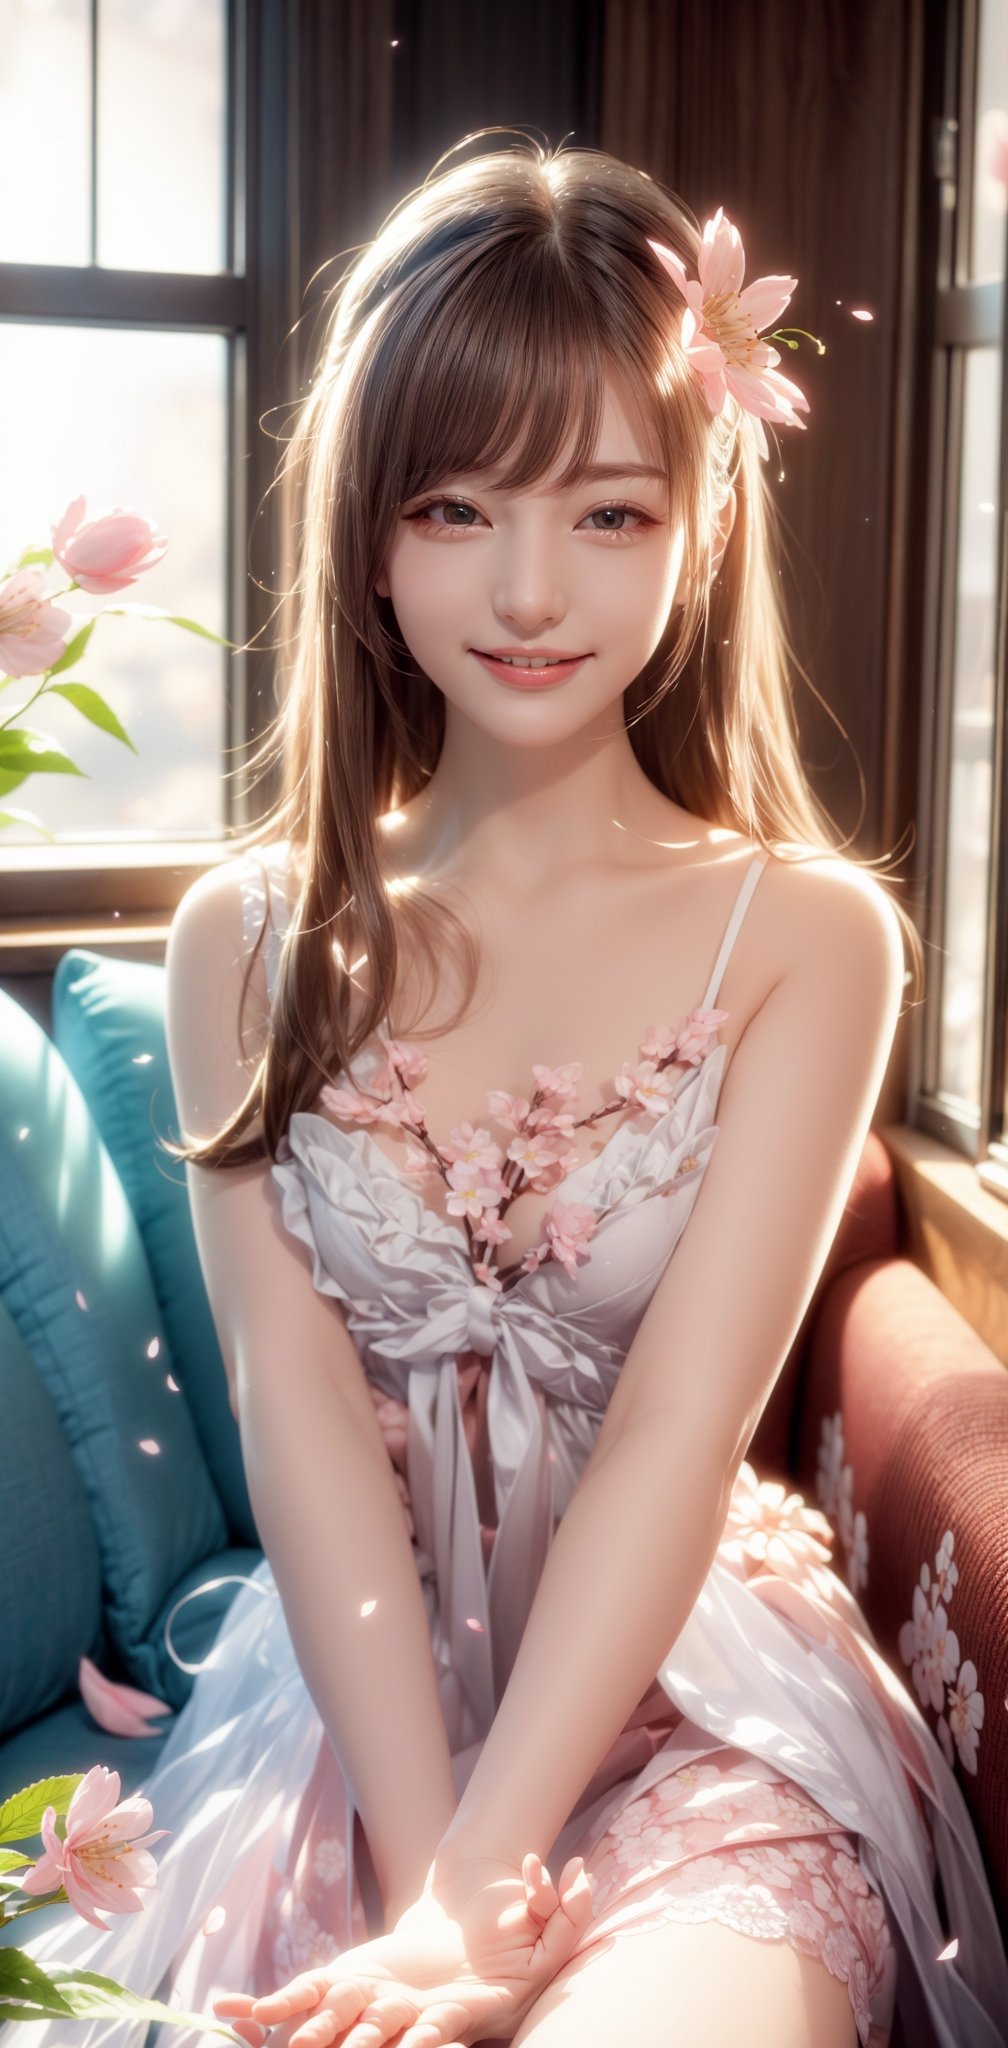 masutepiece, hight resolution, living room, dim light, virant color,cozy warm atmosfer, in the sofa, 30-year-old girl, Smiling at the camera, Finish as shown in the photo, the skin is milk white and beautiful, inner colored, Hair should be tied back, flower in hand, detailed room, window view, cherry_blossoms, falling_petals,